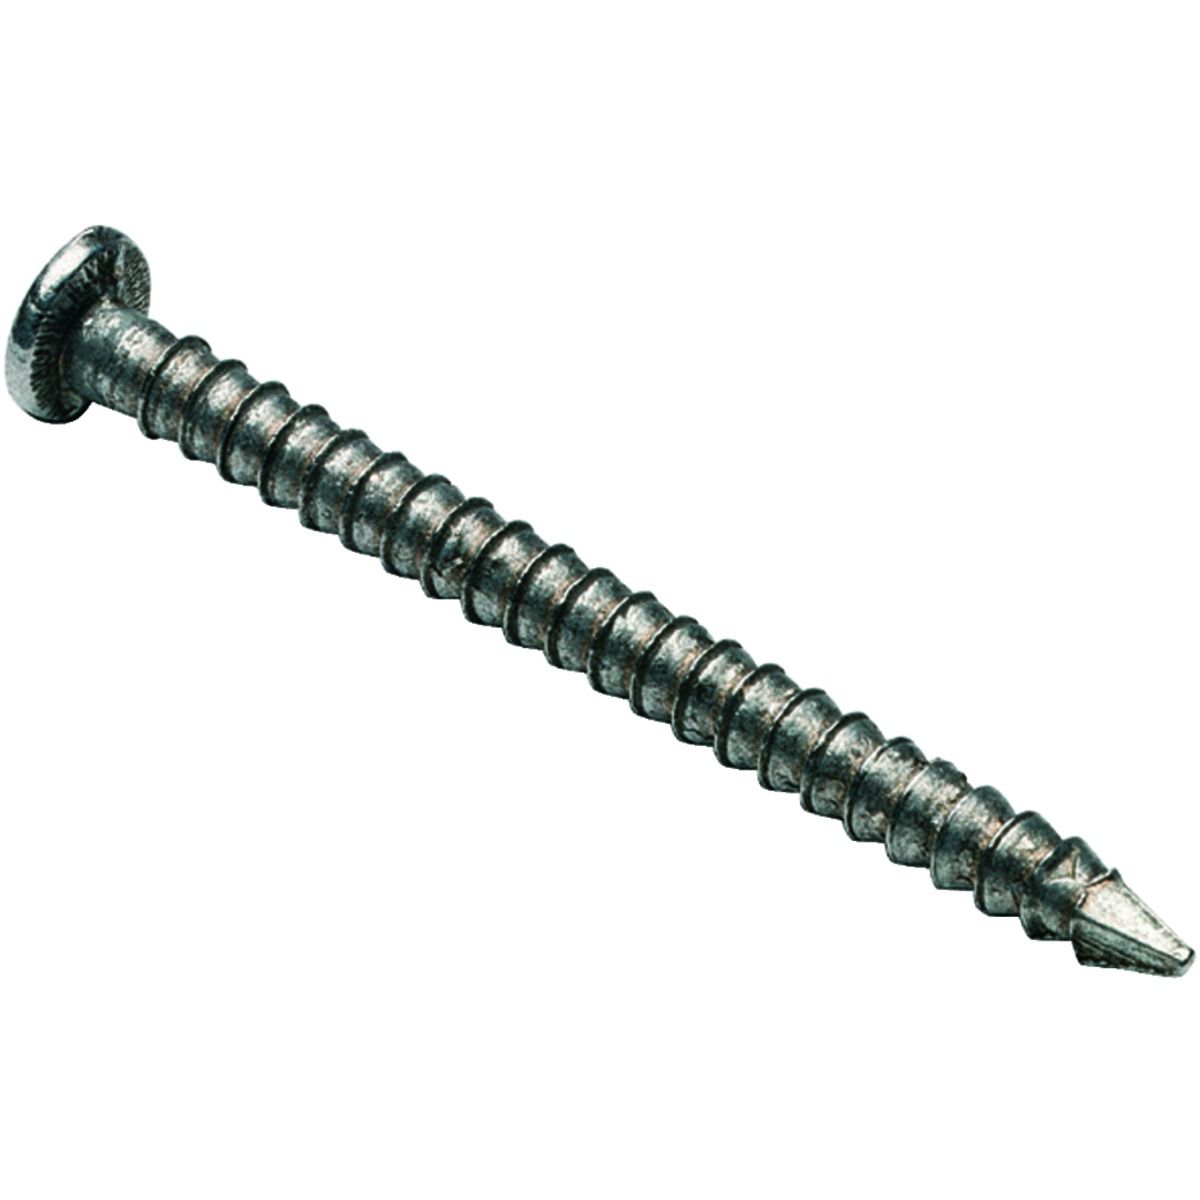 Image of Wickes 25mm Bright Annular Extra Grip Nails - 400g